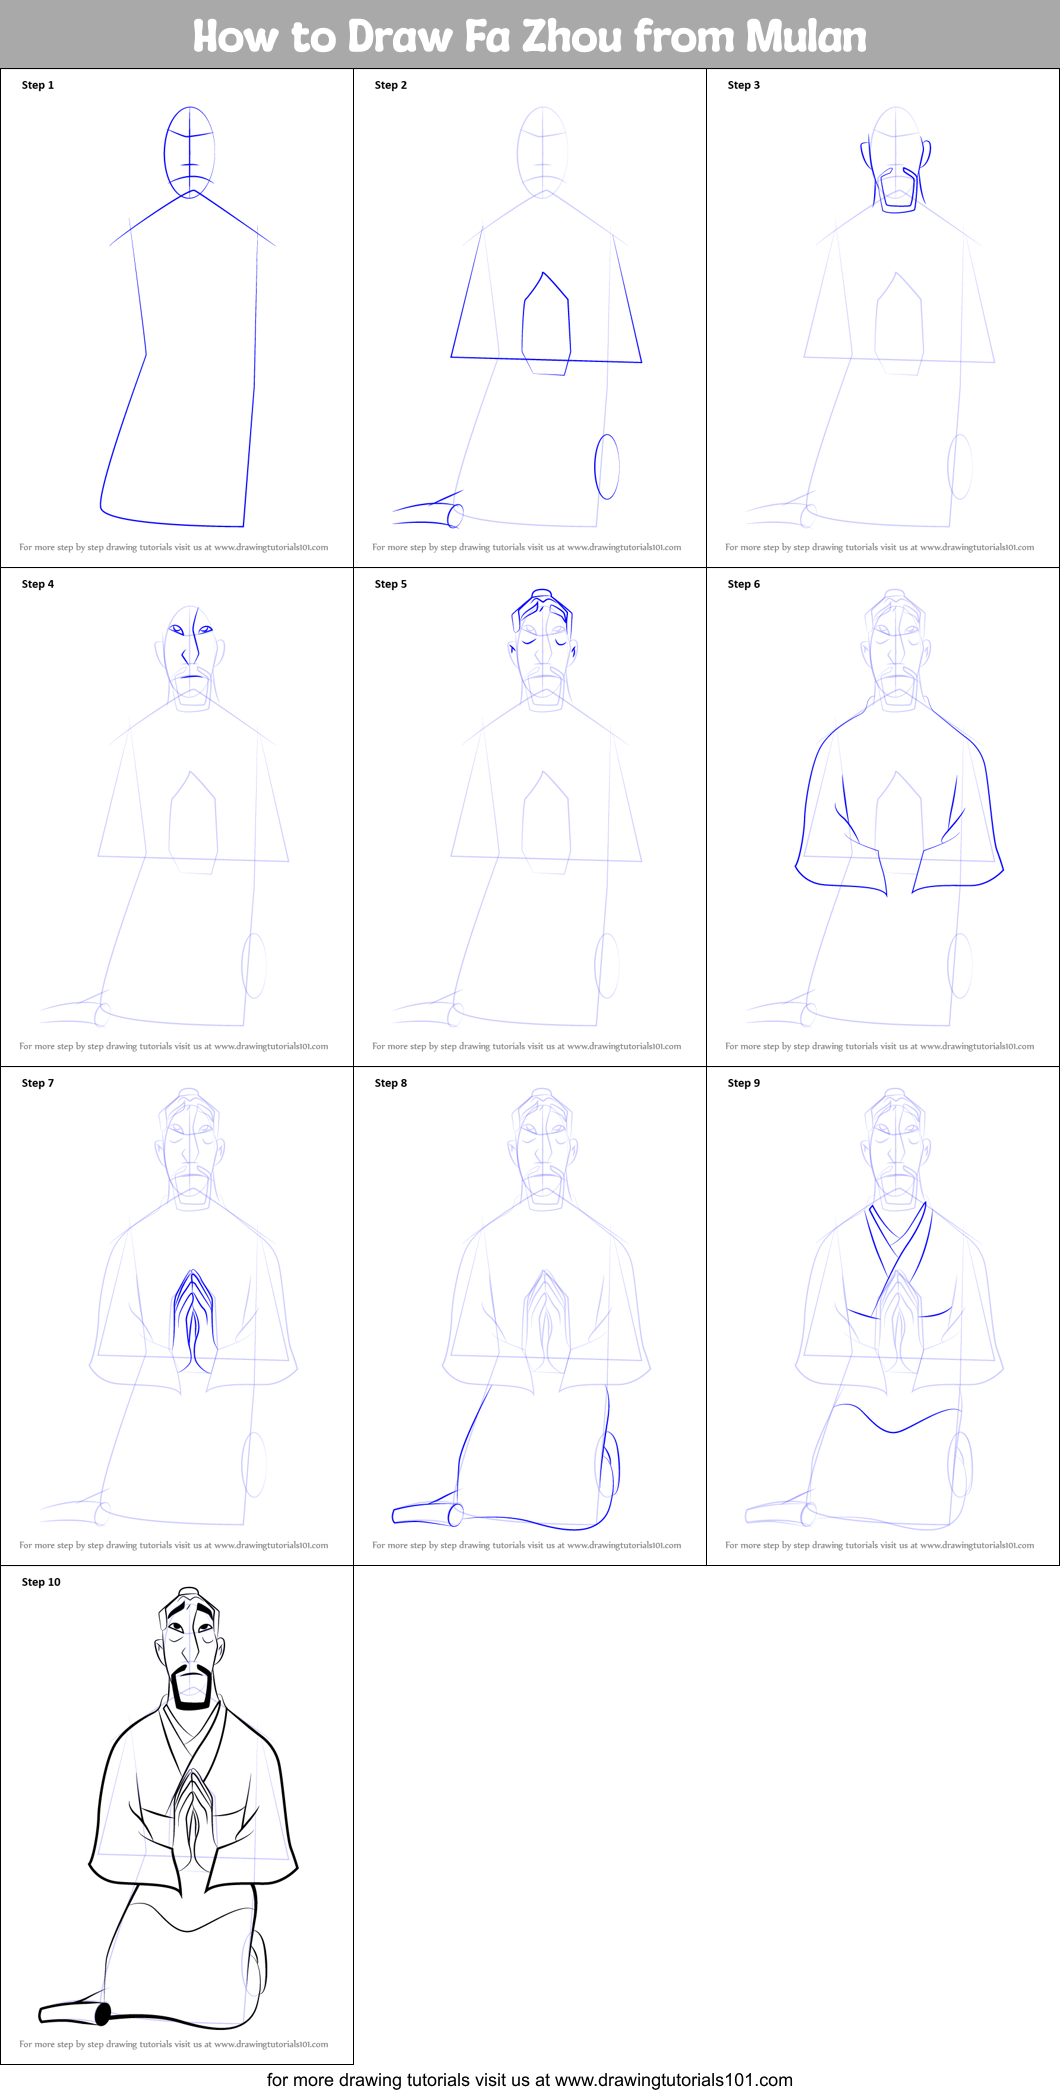 How to Draw Fa Zhou from Mulan (Mulan) Step by Step ...